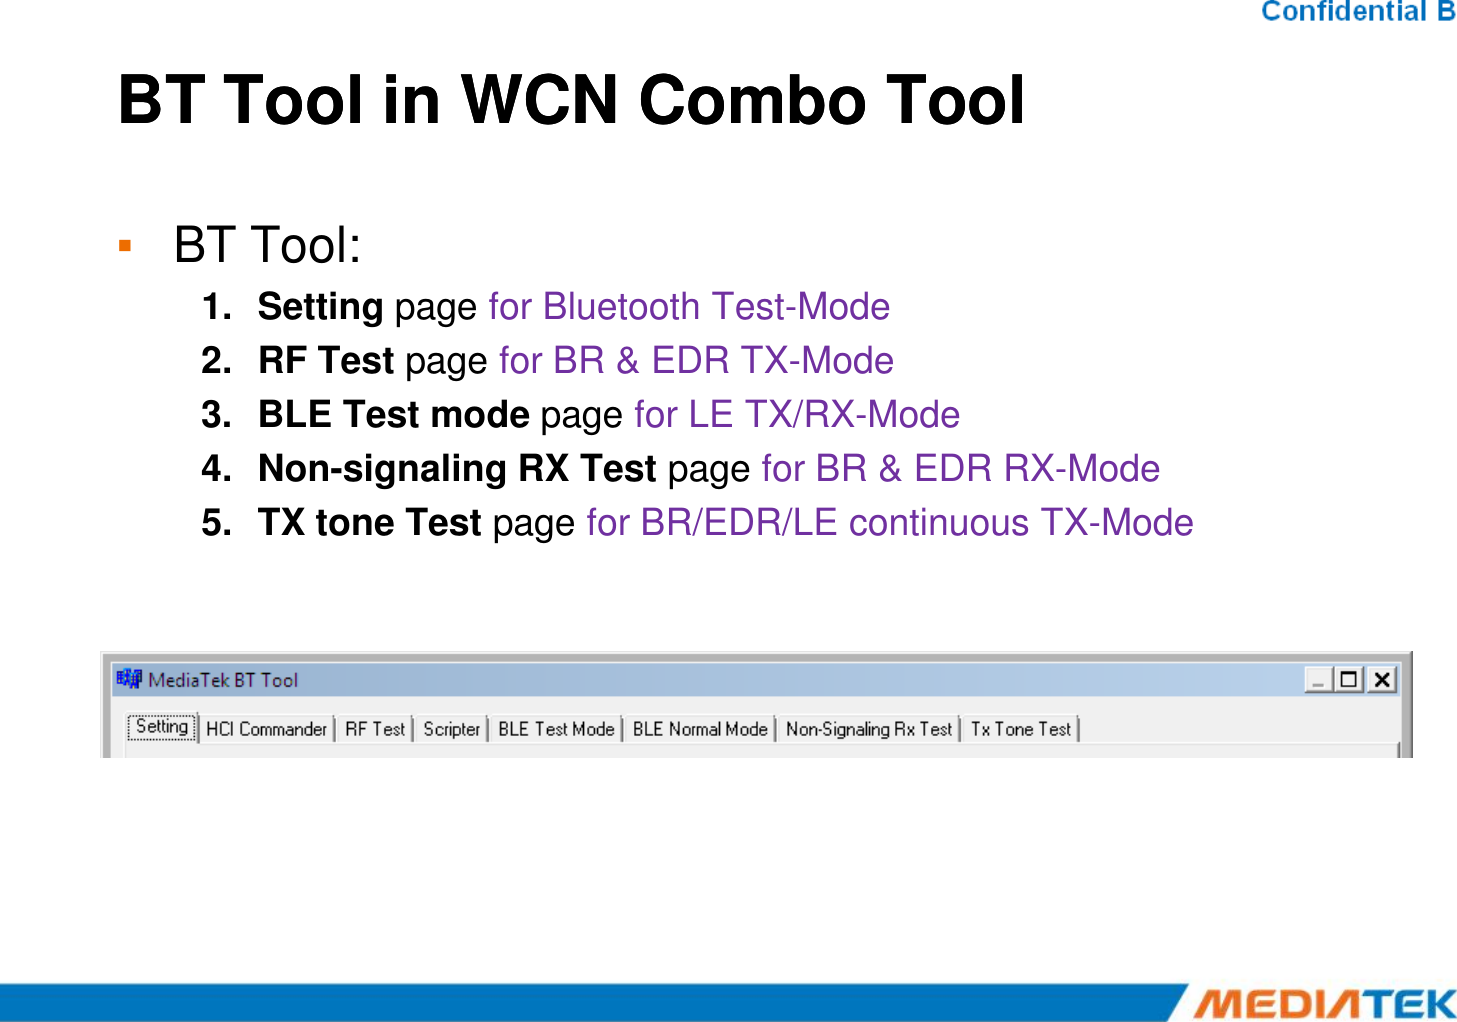 BT Tool in WCN Combo ToolBT Tool in WCN Combo Tool▪BT Tool:1.Setting page for Bluetooth Test-Mode 2.RF Test page for BR &amp; EDR TX-Mode 3.BLE Test mode page for LE TX/RX-Mode 4.Non-signaling RX Test page for BR &amp; EDR RX-Mode 5.TX tone Test page for BR/EDR/LE continuous TX-Mode 5.TX tone Test page for BR/EDR/LE continuous TX-Mode 